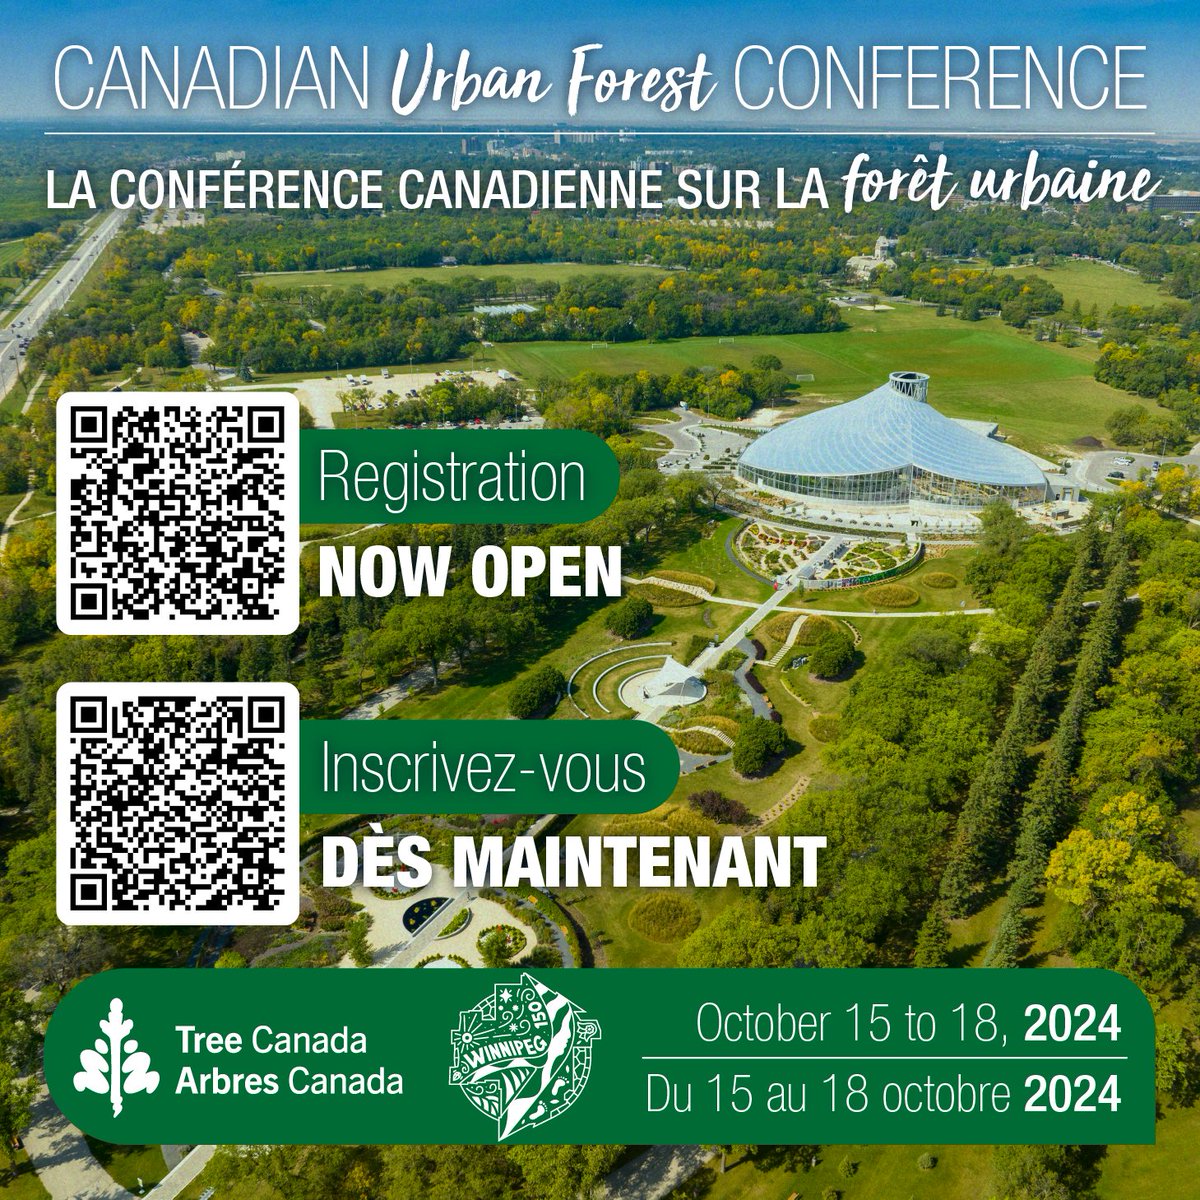 🌳 Registration for the Canadian Urban Forest Conference is OPEN! Join us in Winnipeg from Oct 15-18 for discussions on 'Equity in Canada’s #UrbanForests'. Don't miss the EARLY BIRD rate! Secure your spot now: bit.ly/4aJZs9R 🍁#CUFC2024